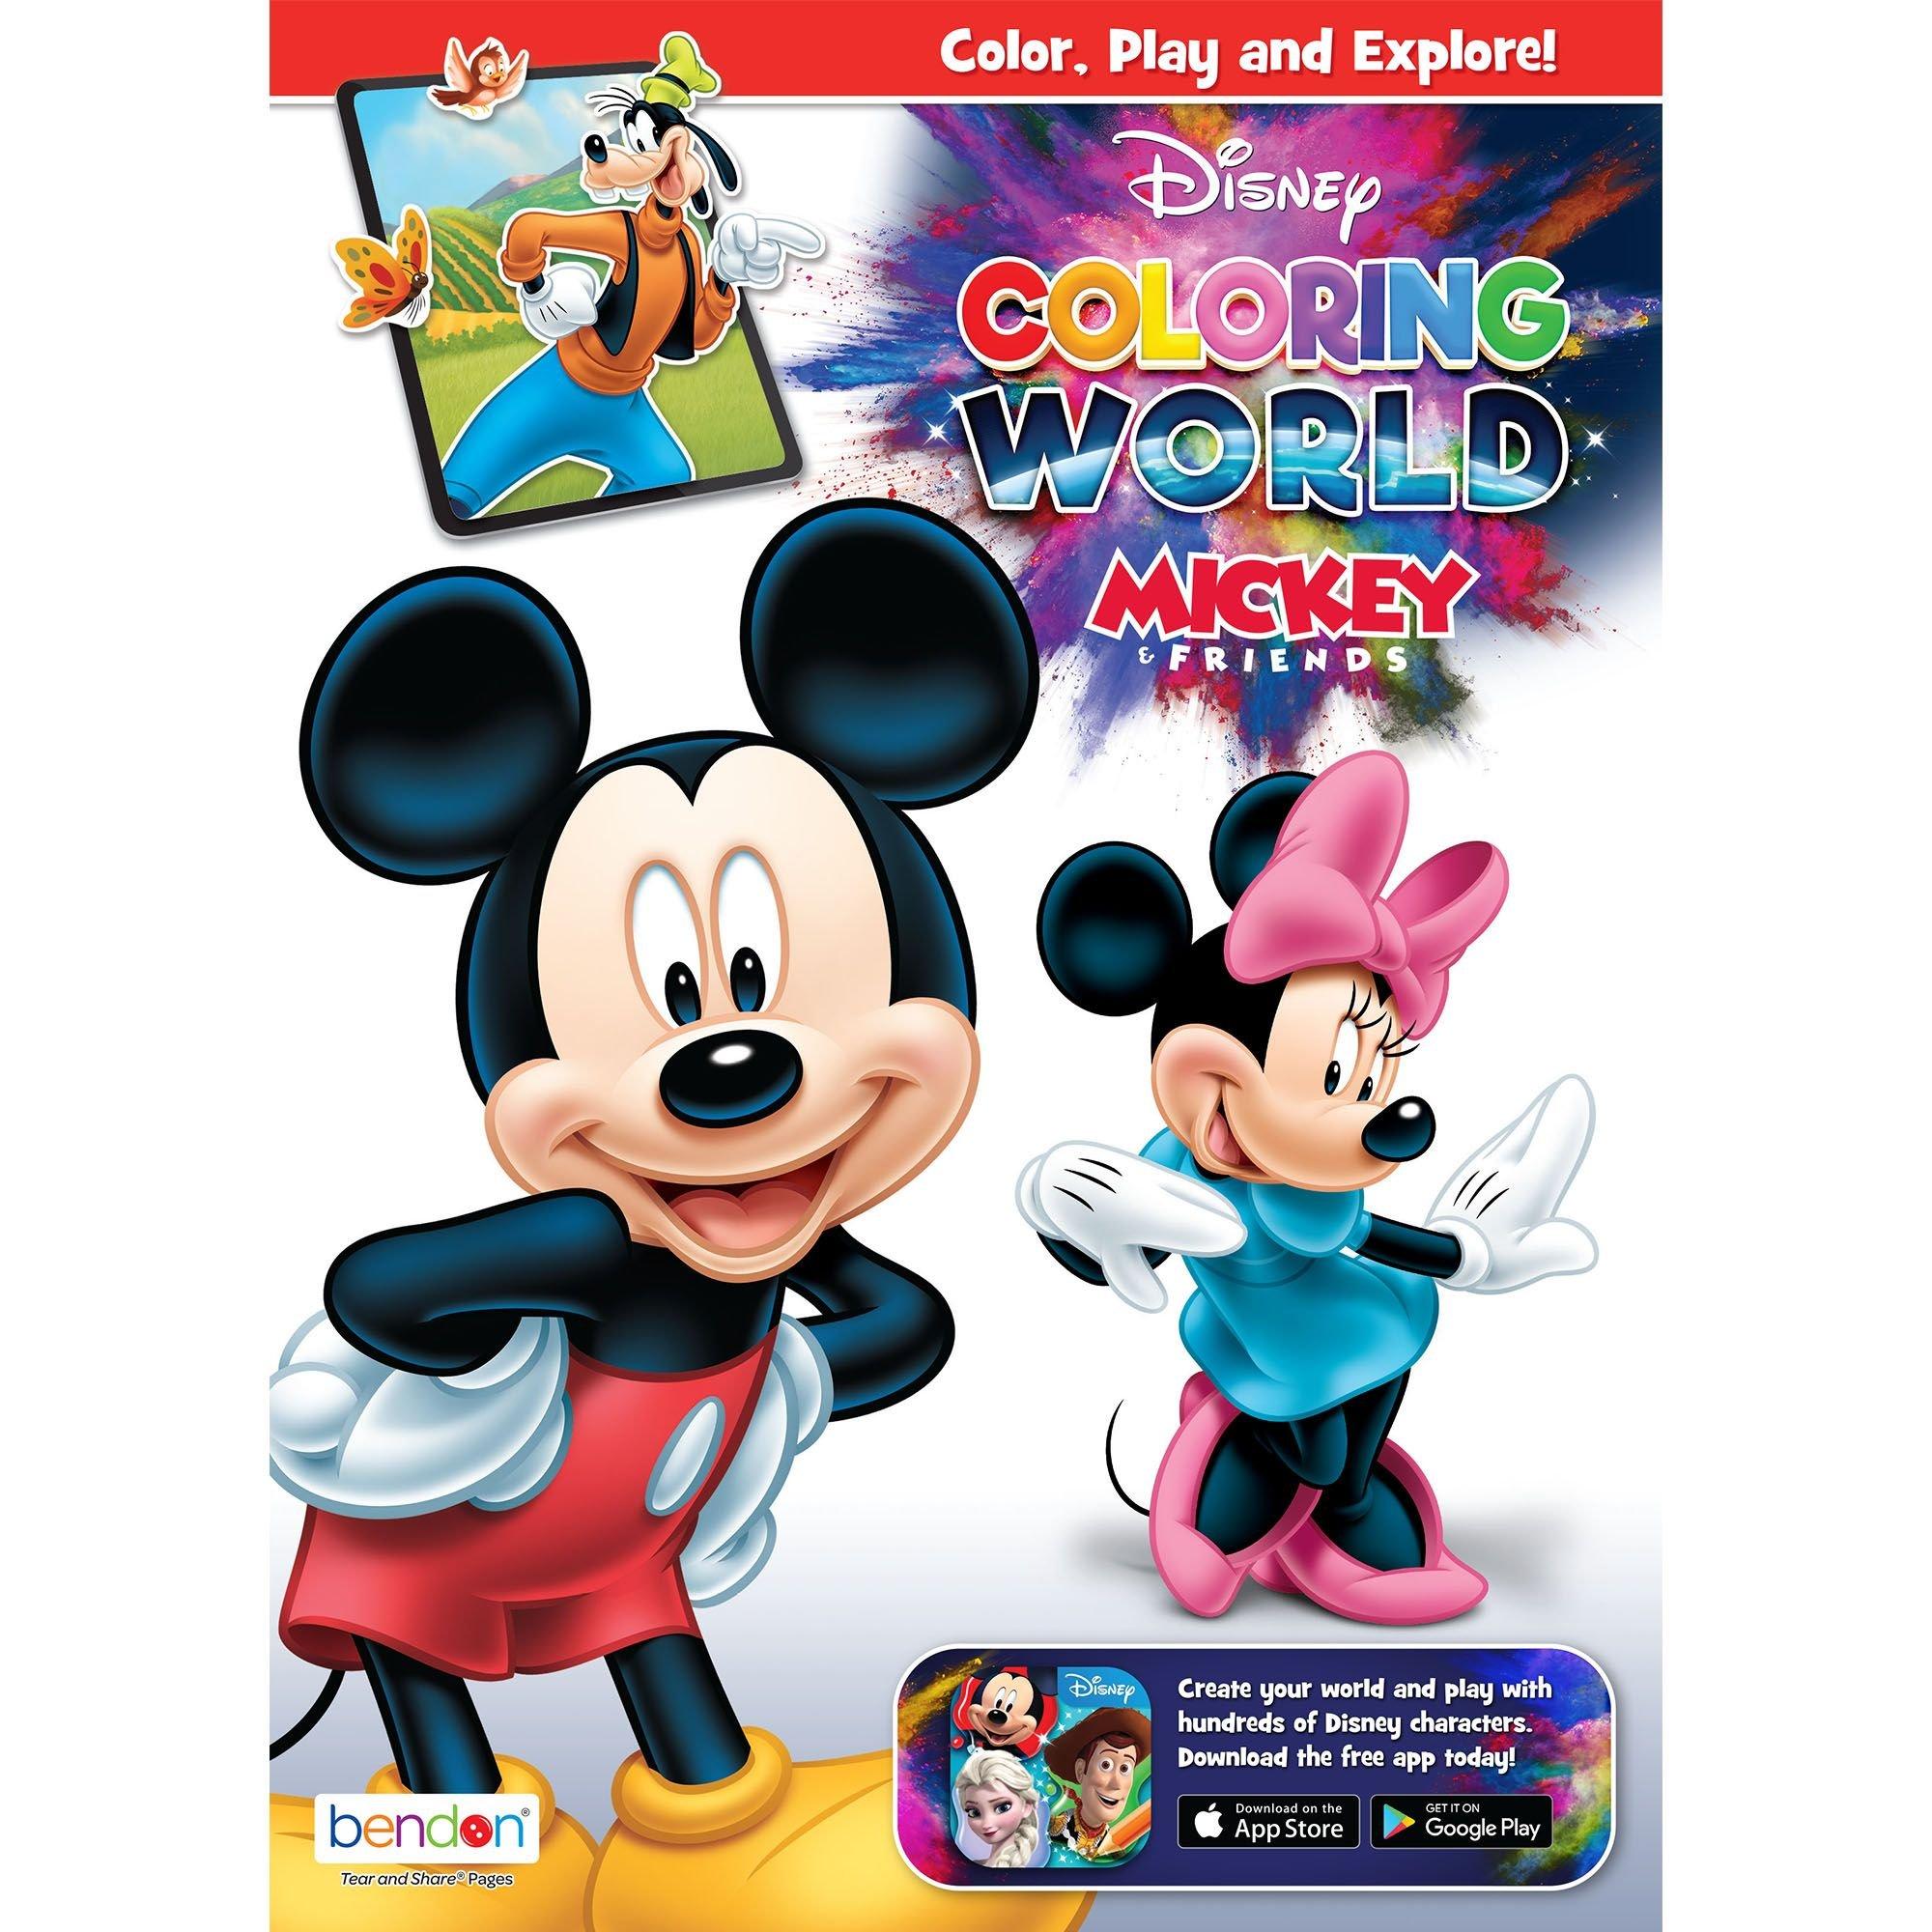 The Happy Planner, Disney, Mickey & Friends Value Pack Stickers